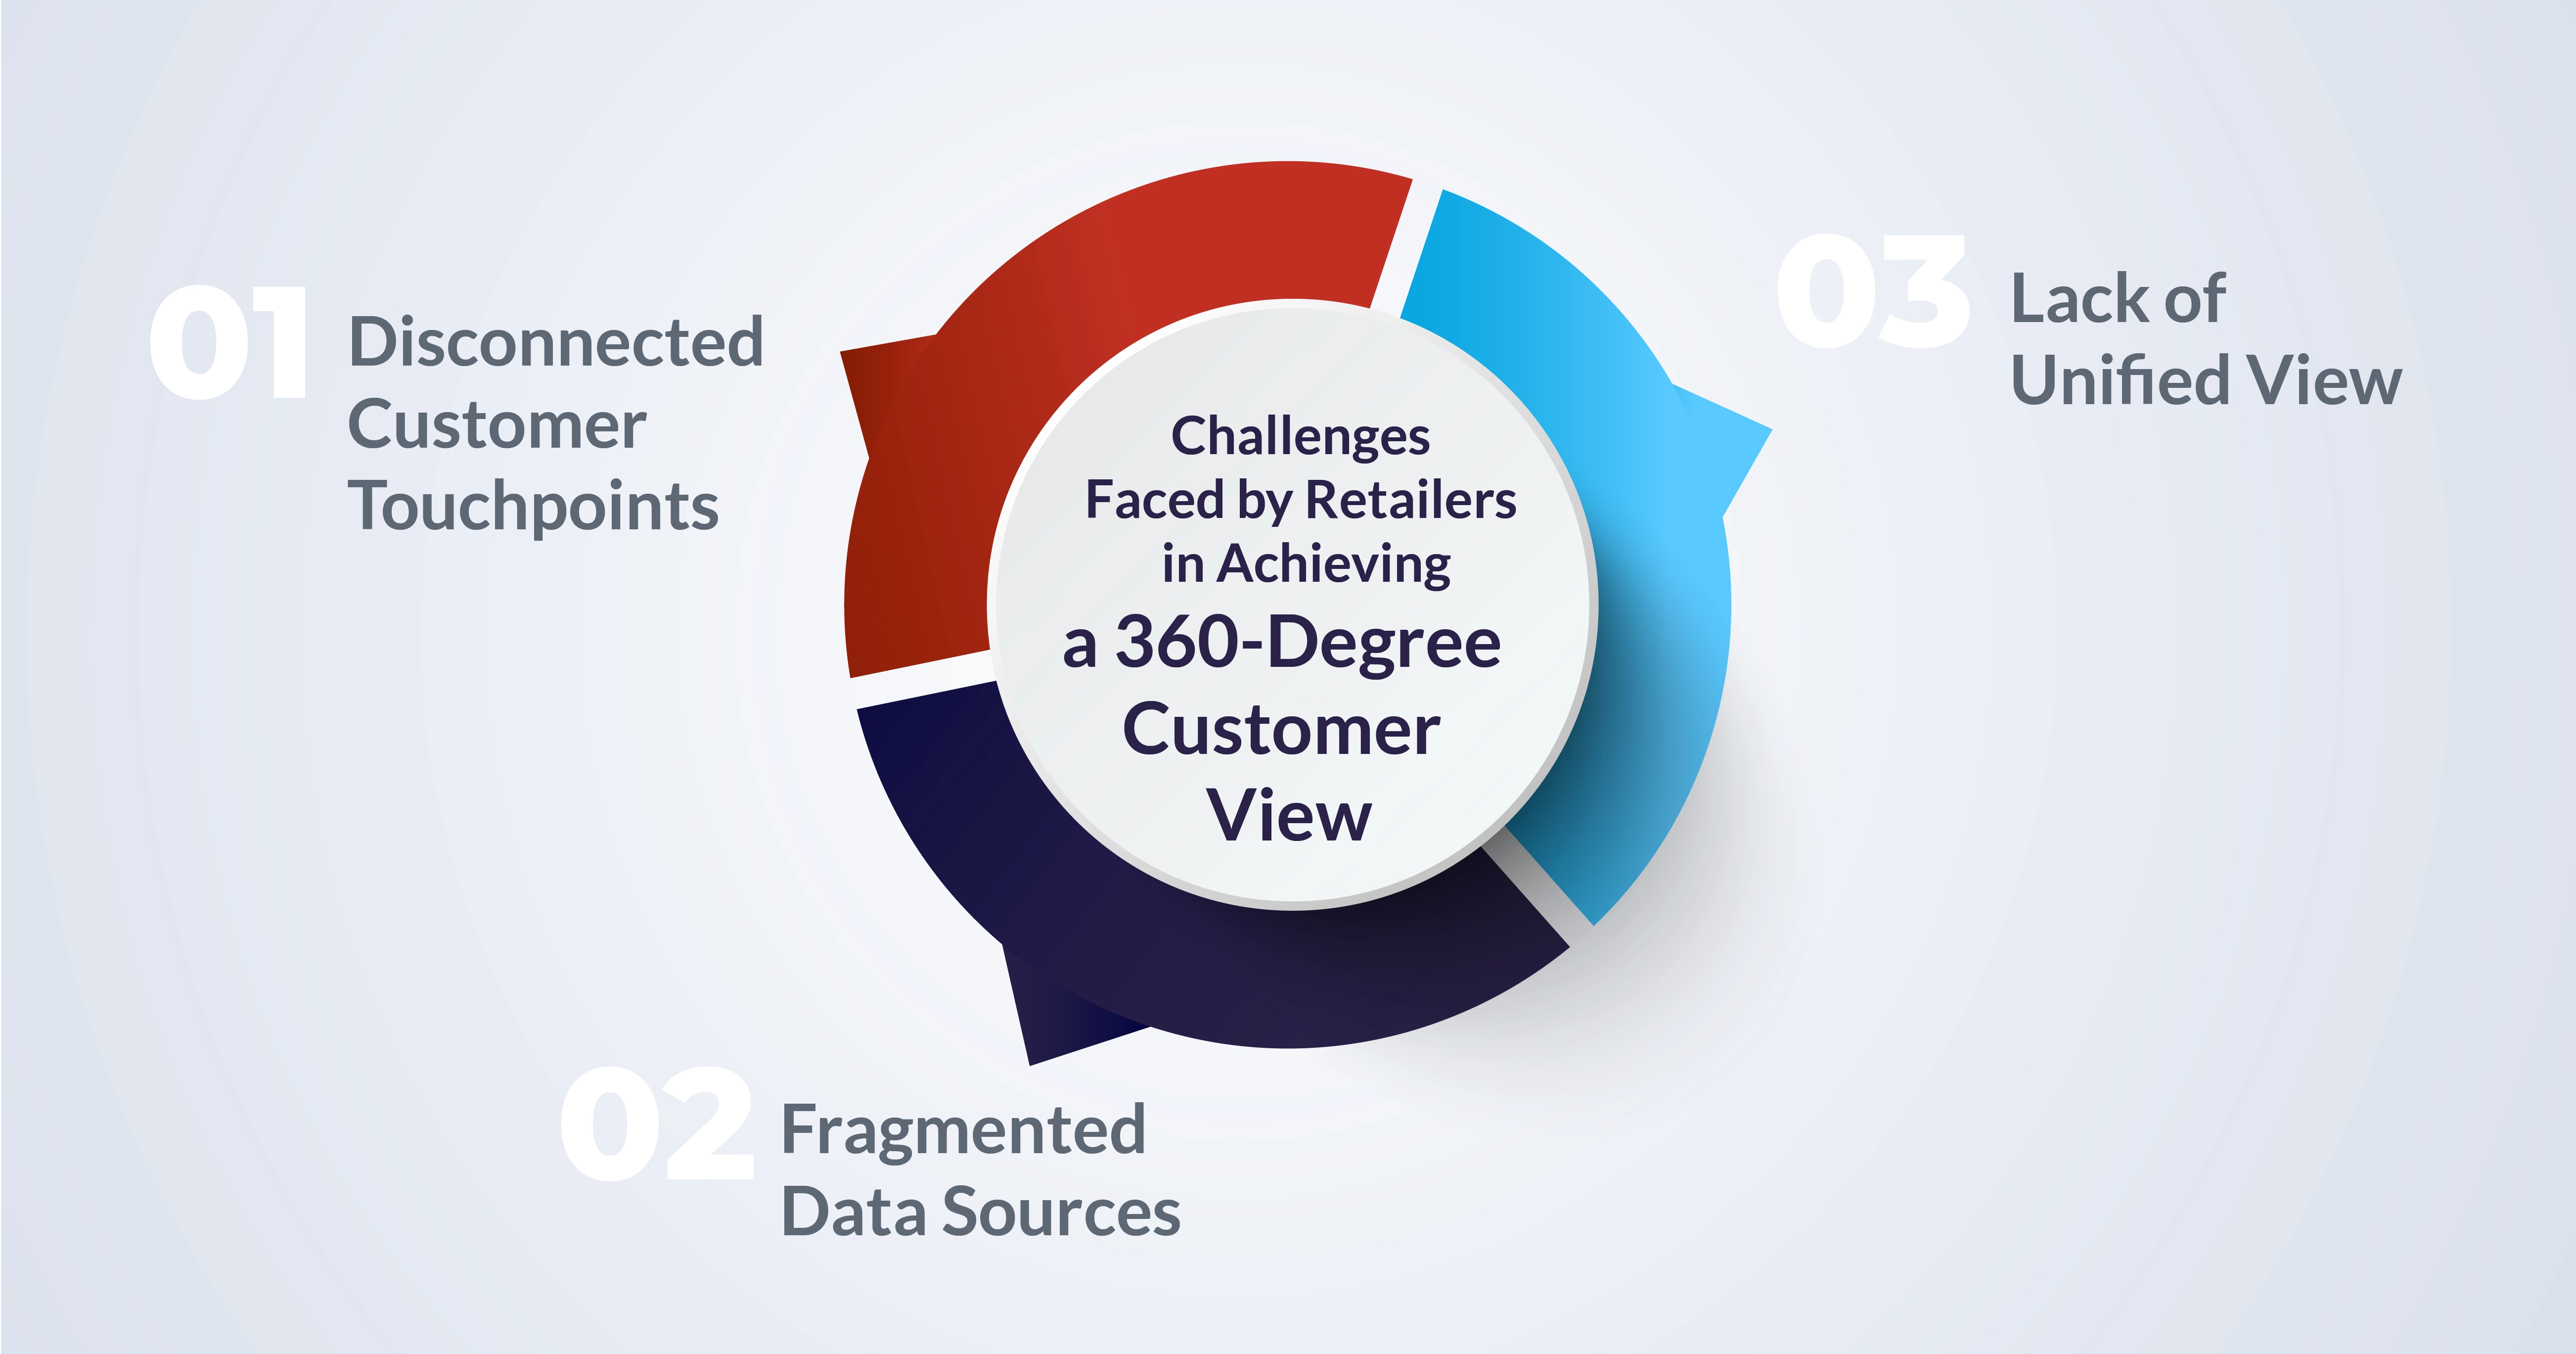 Challenges Faced by Retailers in Achieving a 360-Degree Customer View